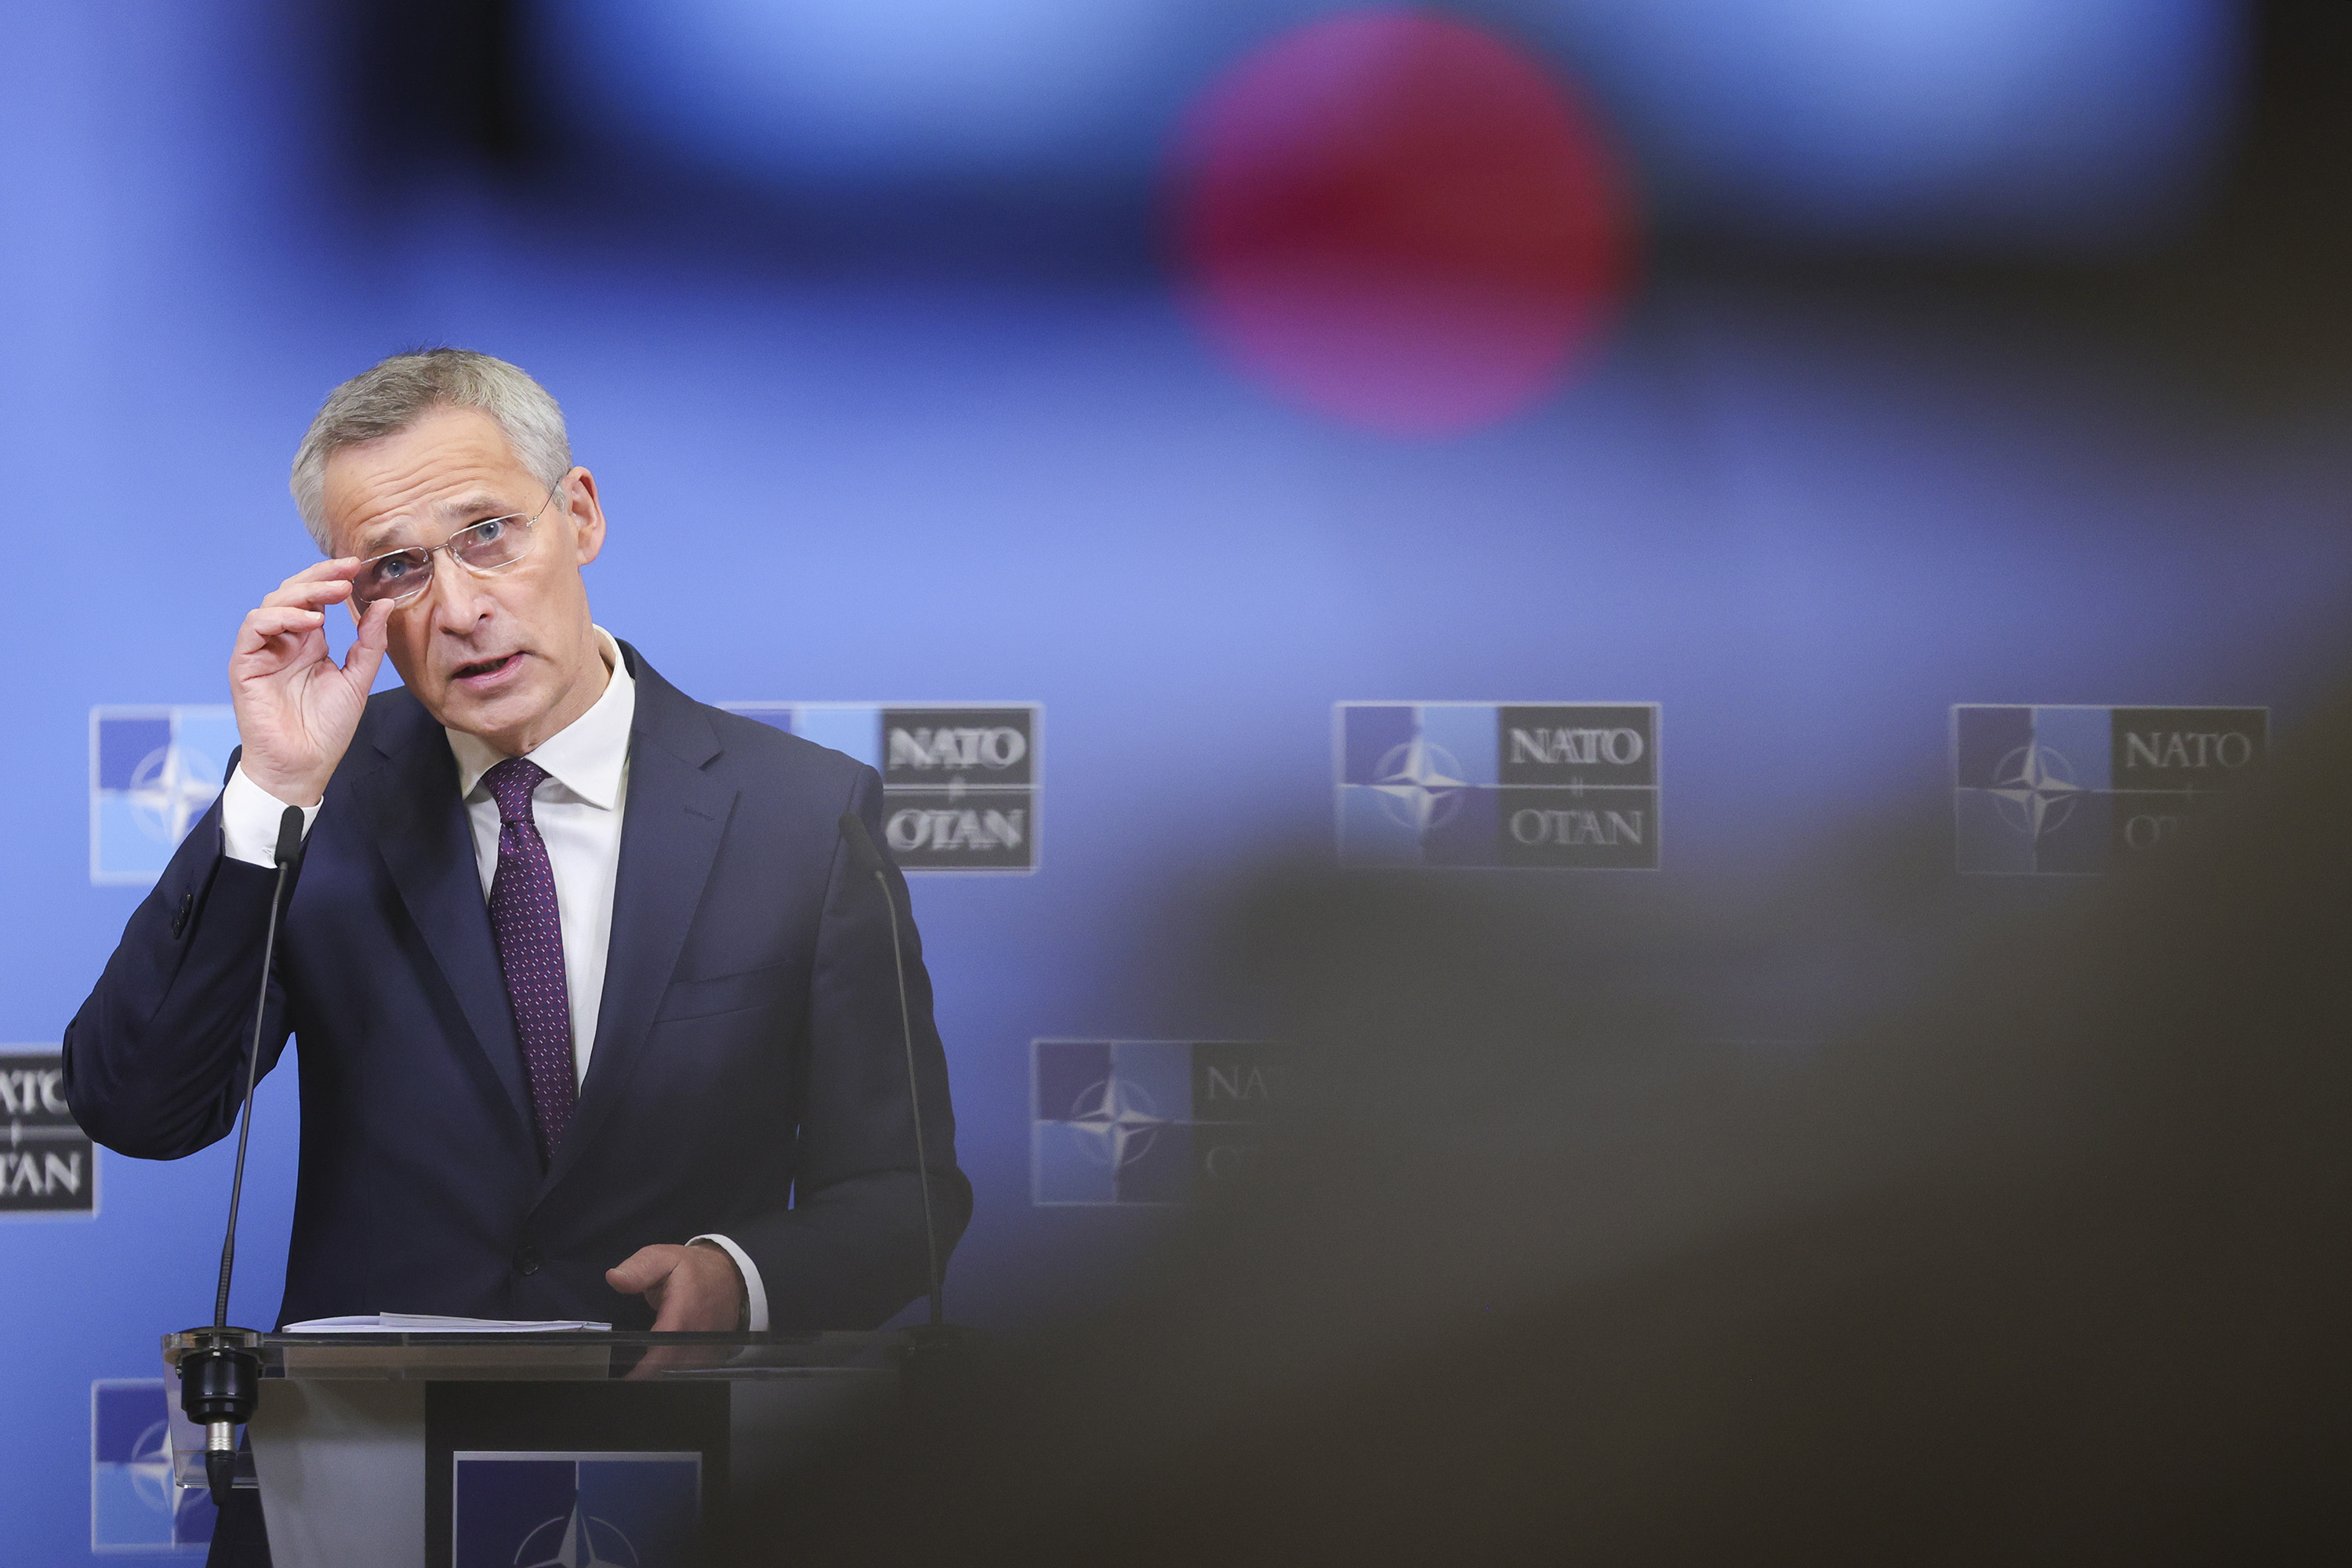 NATO Secretary General Jens Stoltenberg speaks during a news conference in Brussels, Belgium, on February 15.